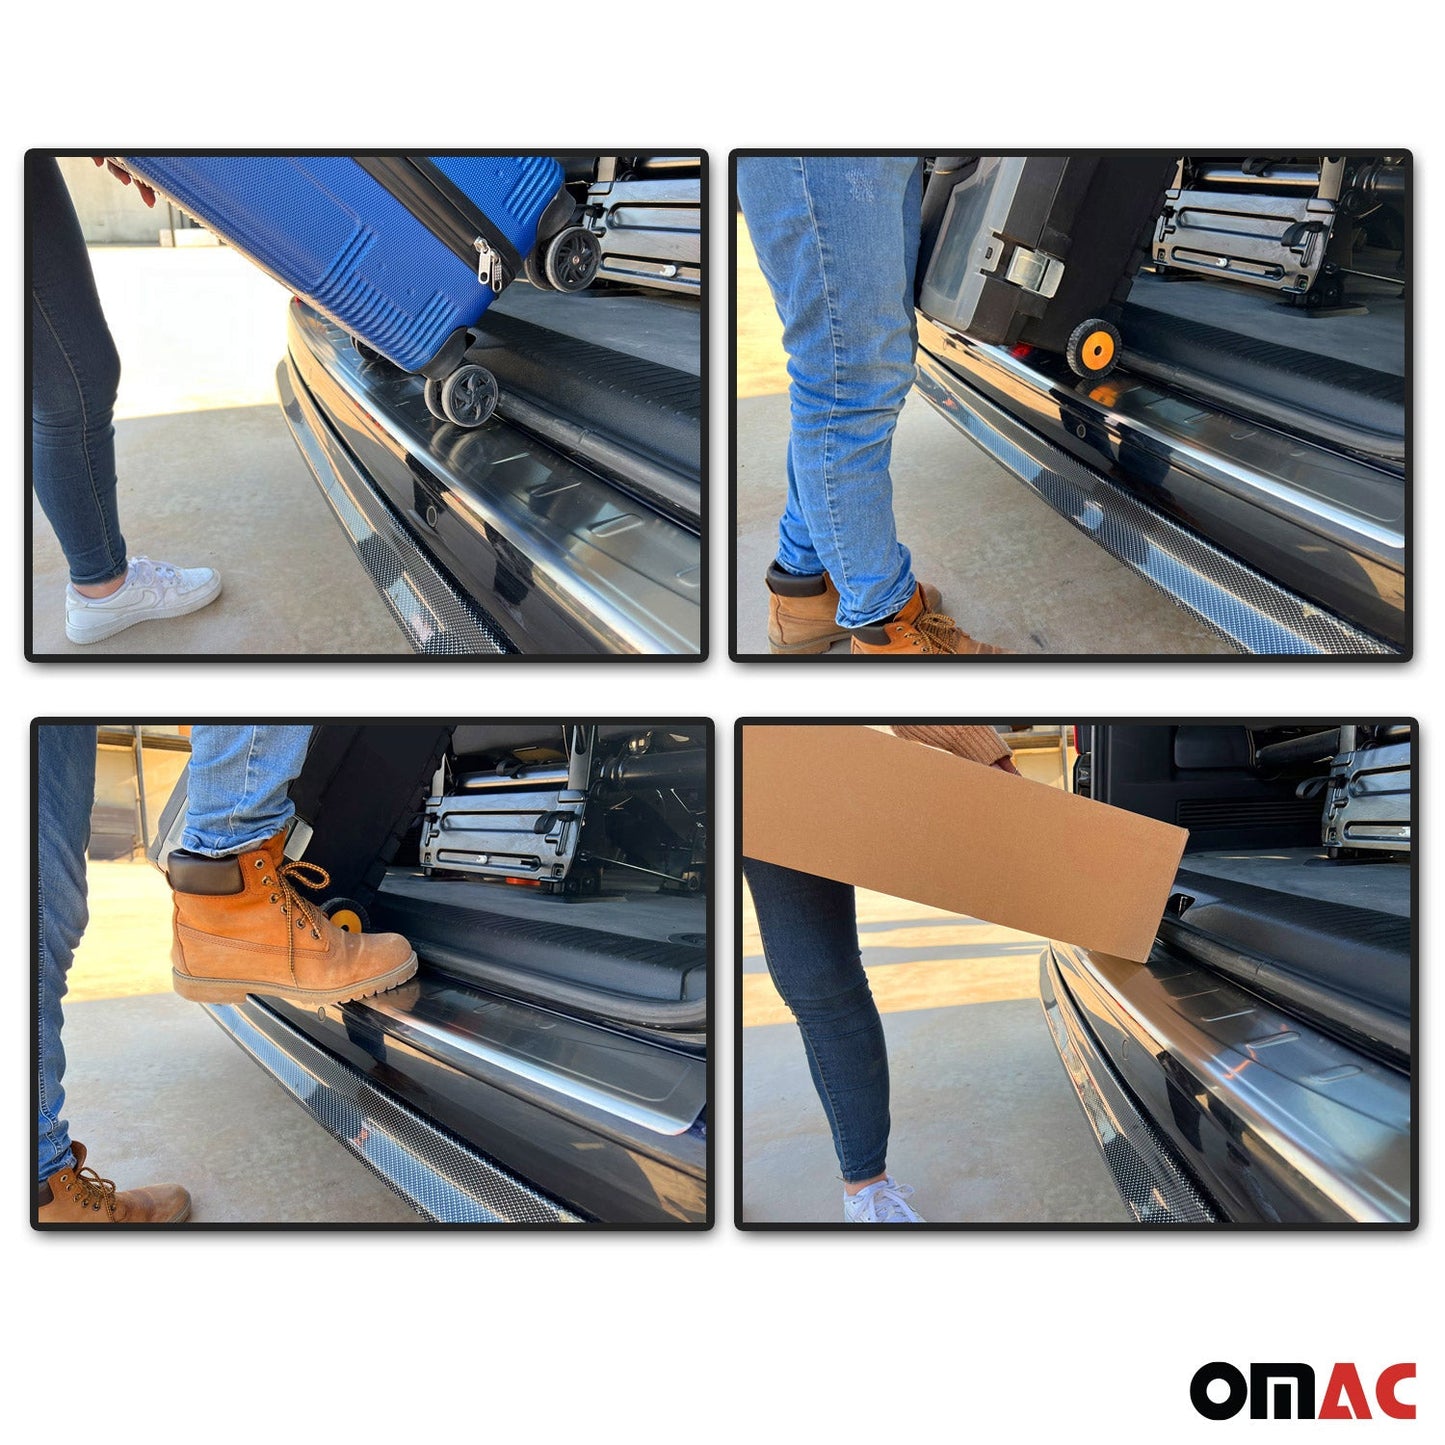 OMAC Rear Bumper Sill Cover Protector Guard for VW Golf Mk5 2004-2010 Brushed Steel K-7503093T